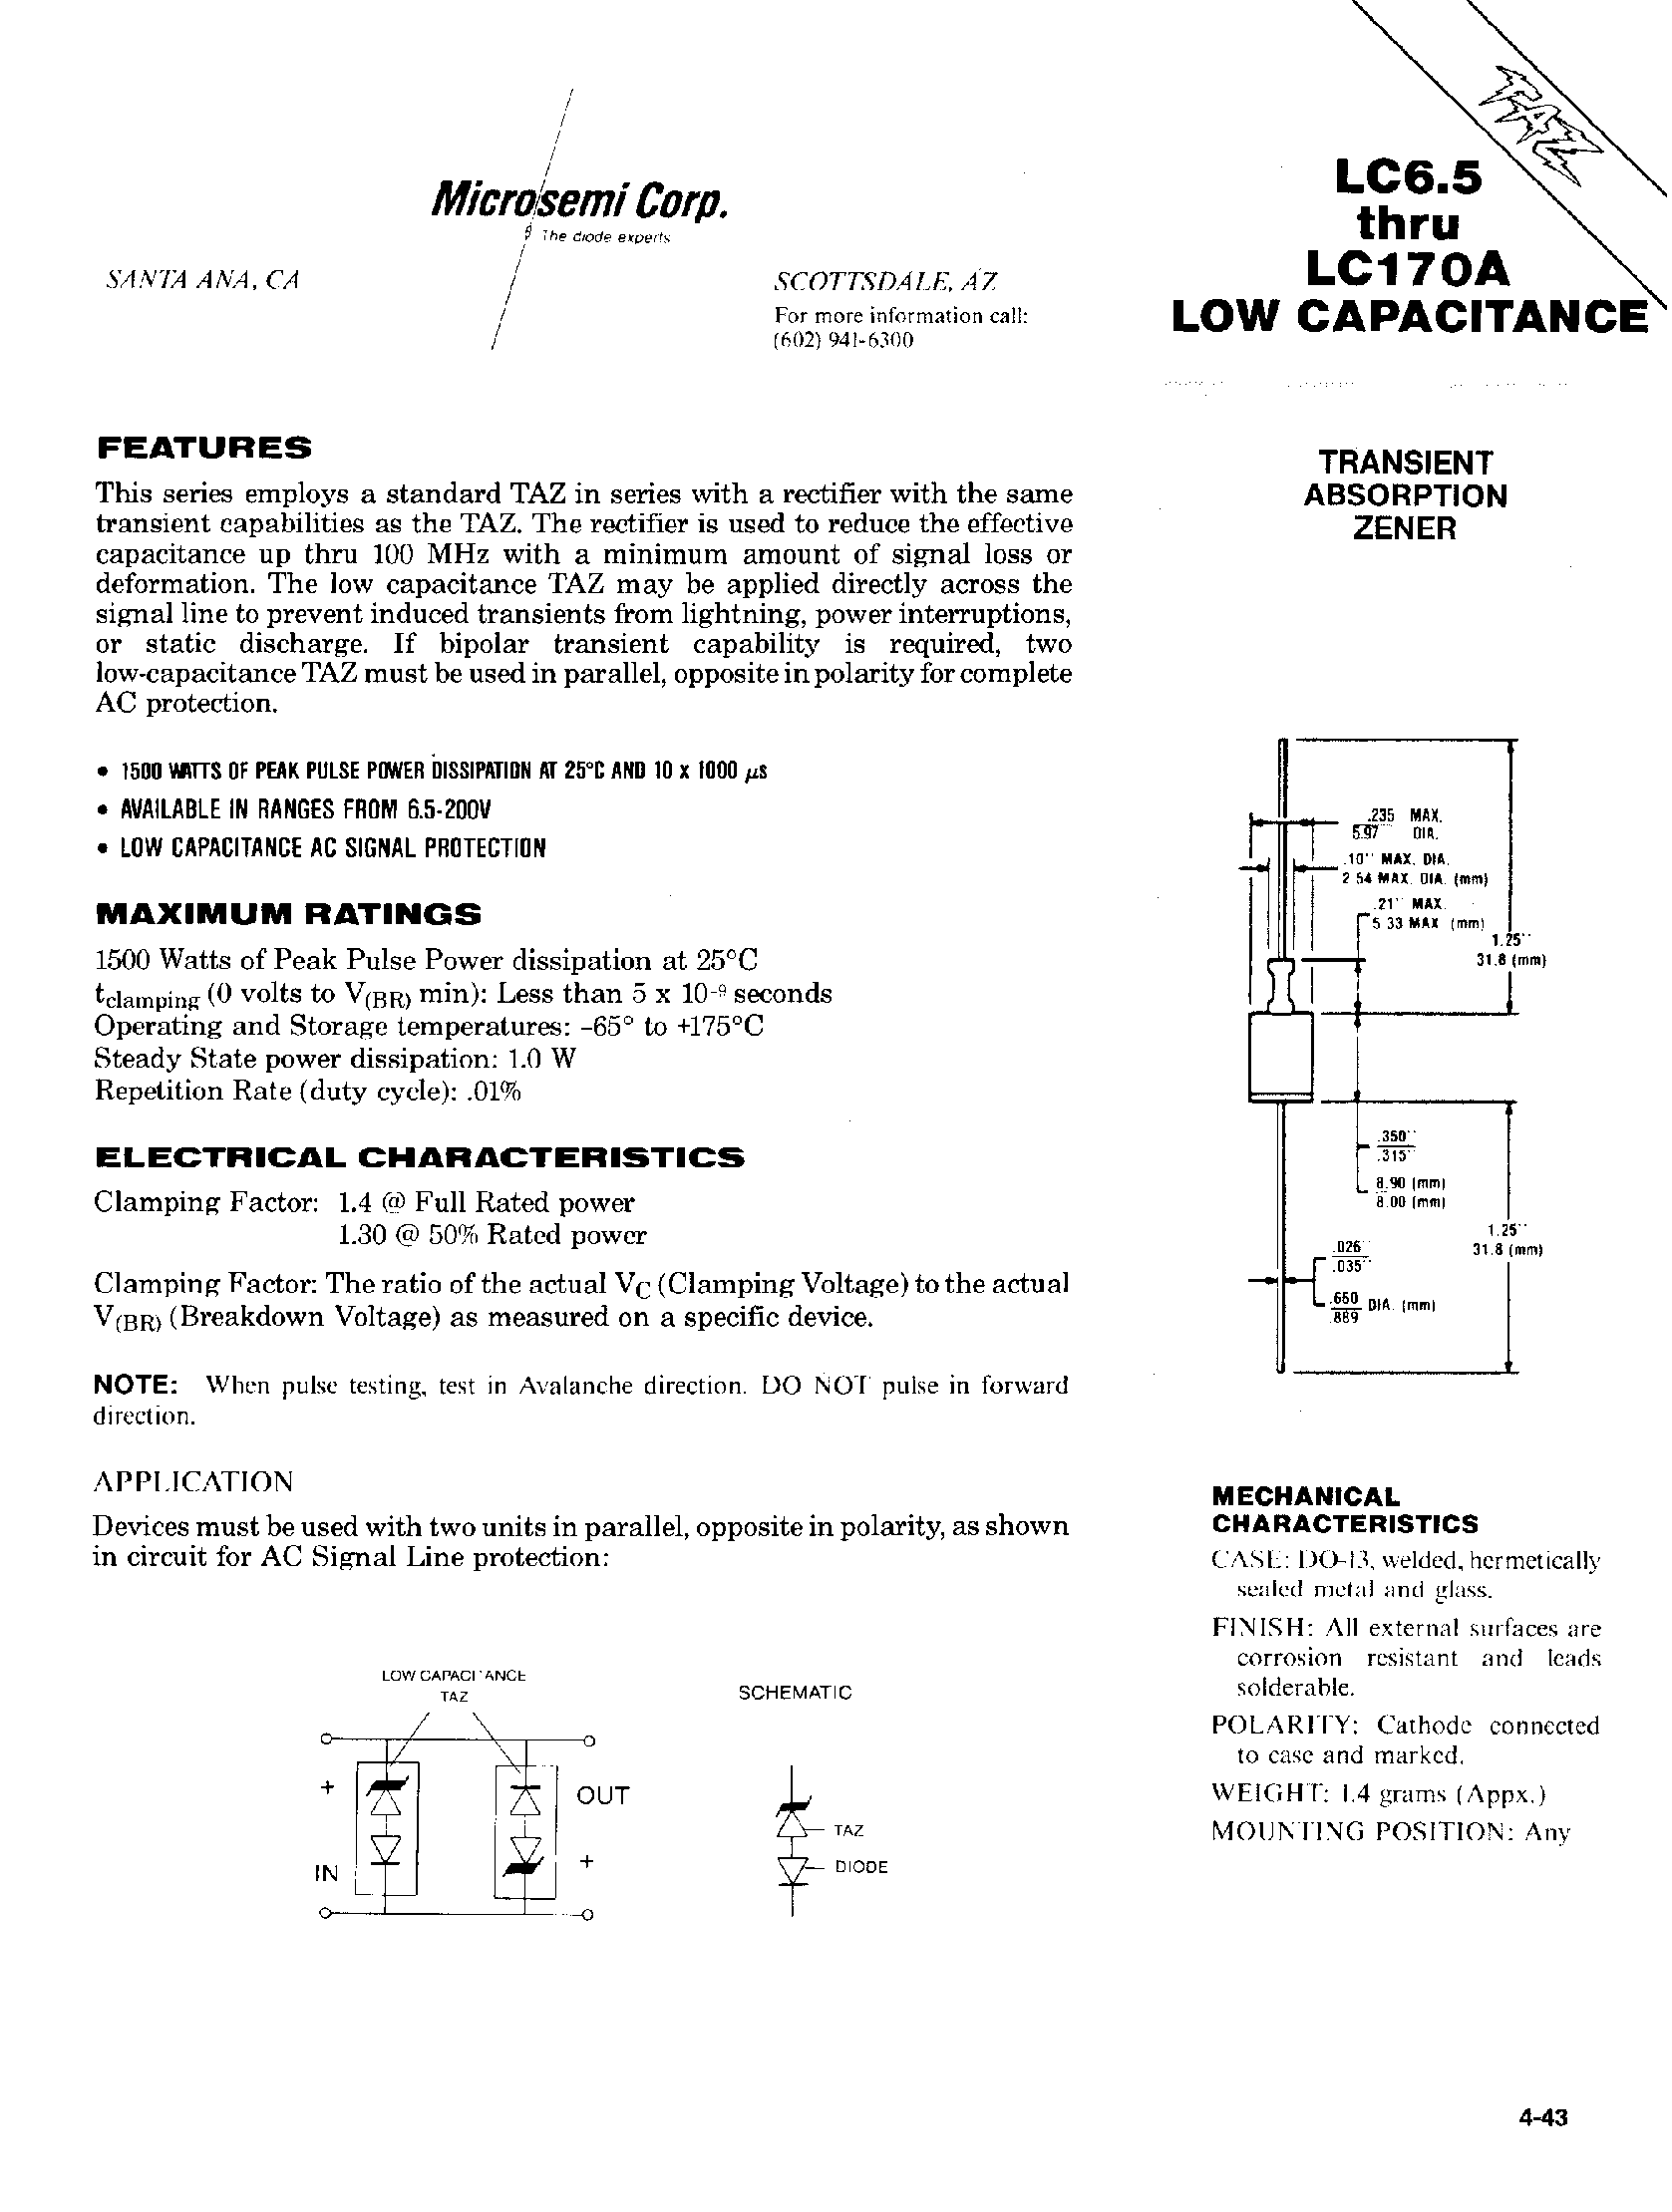 Datasheet LC130 - TRANSIENT ABSORPTION ZENER page 1